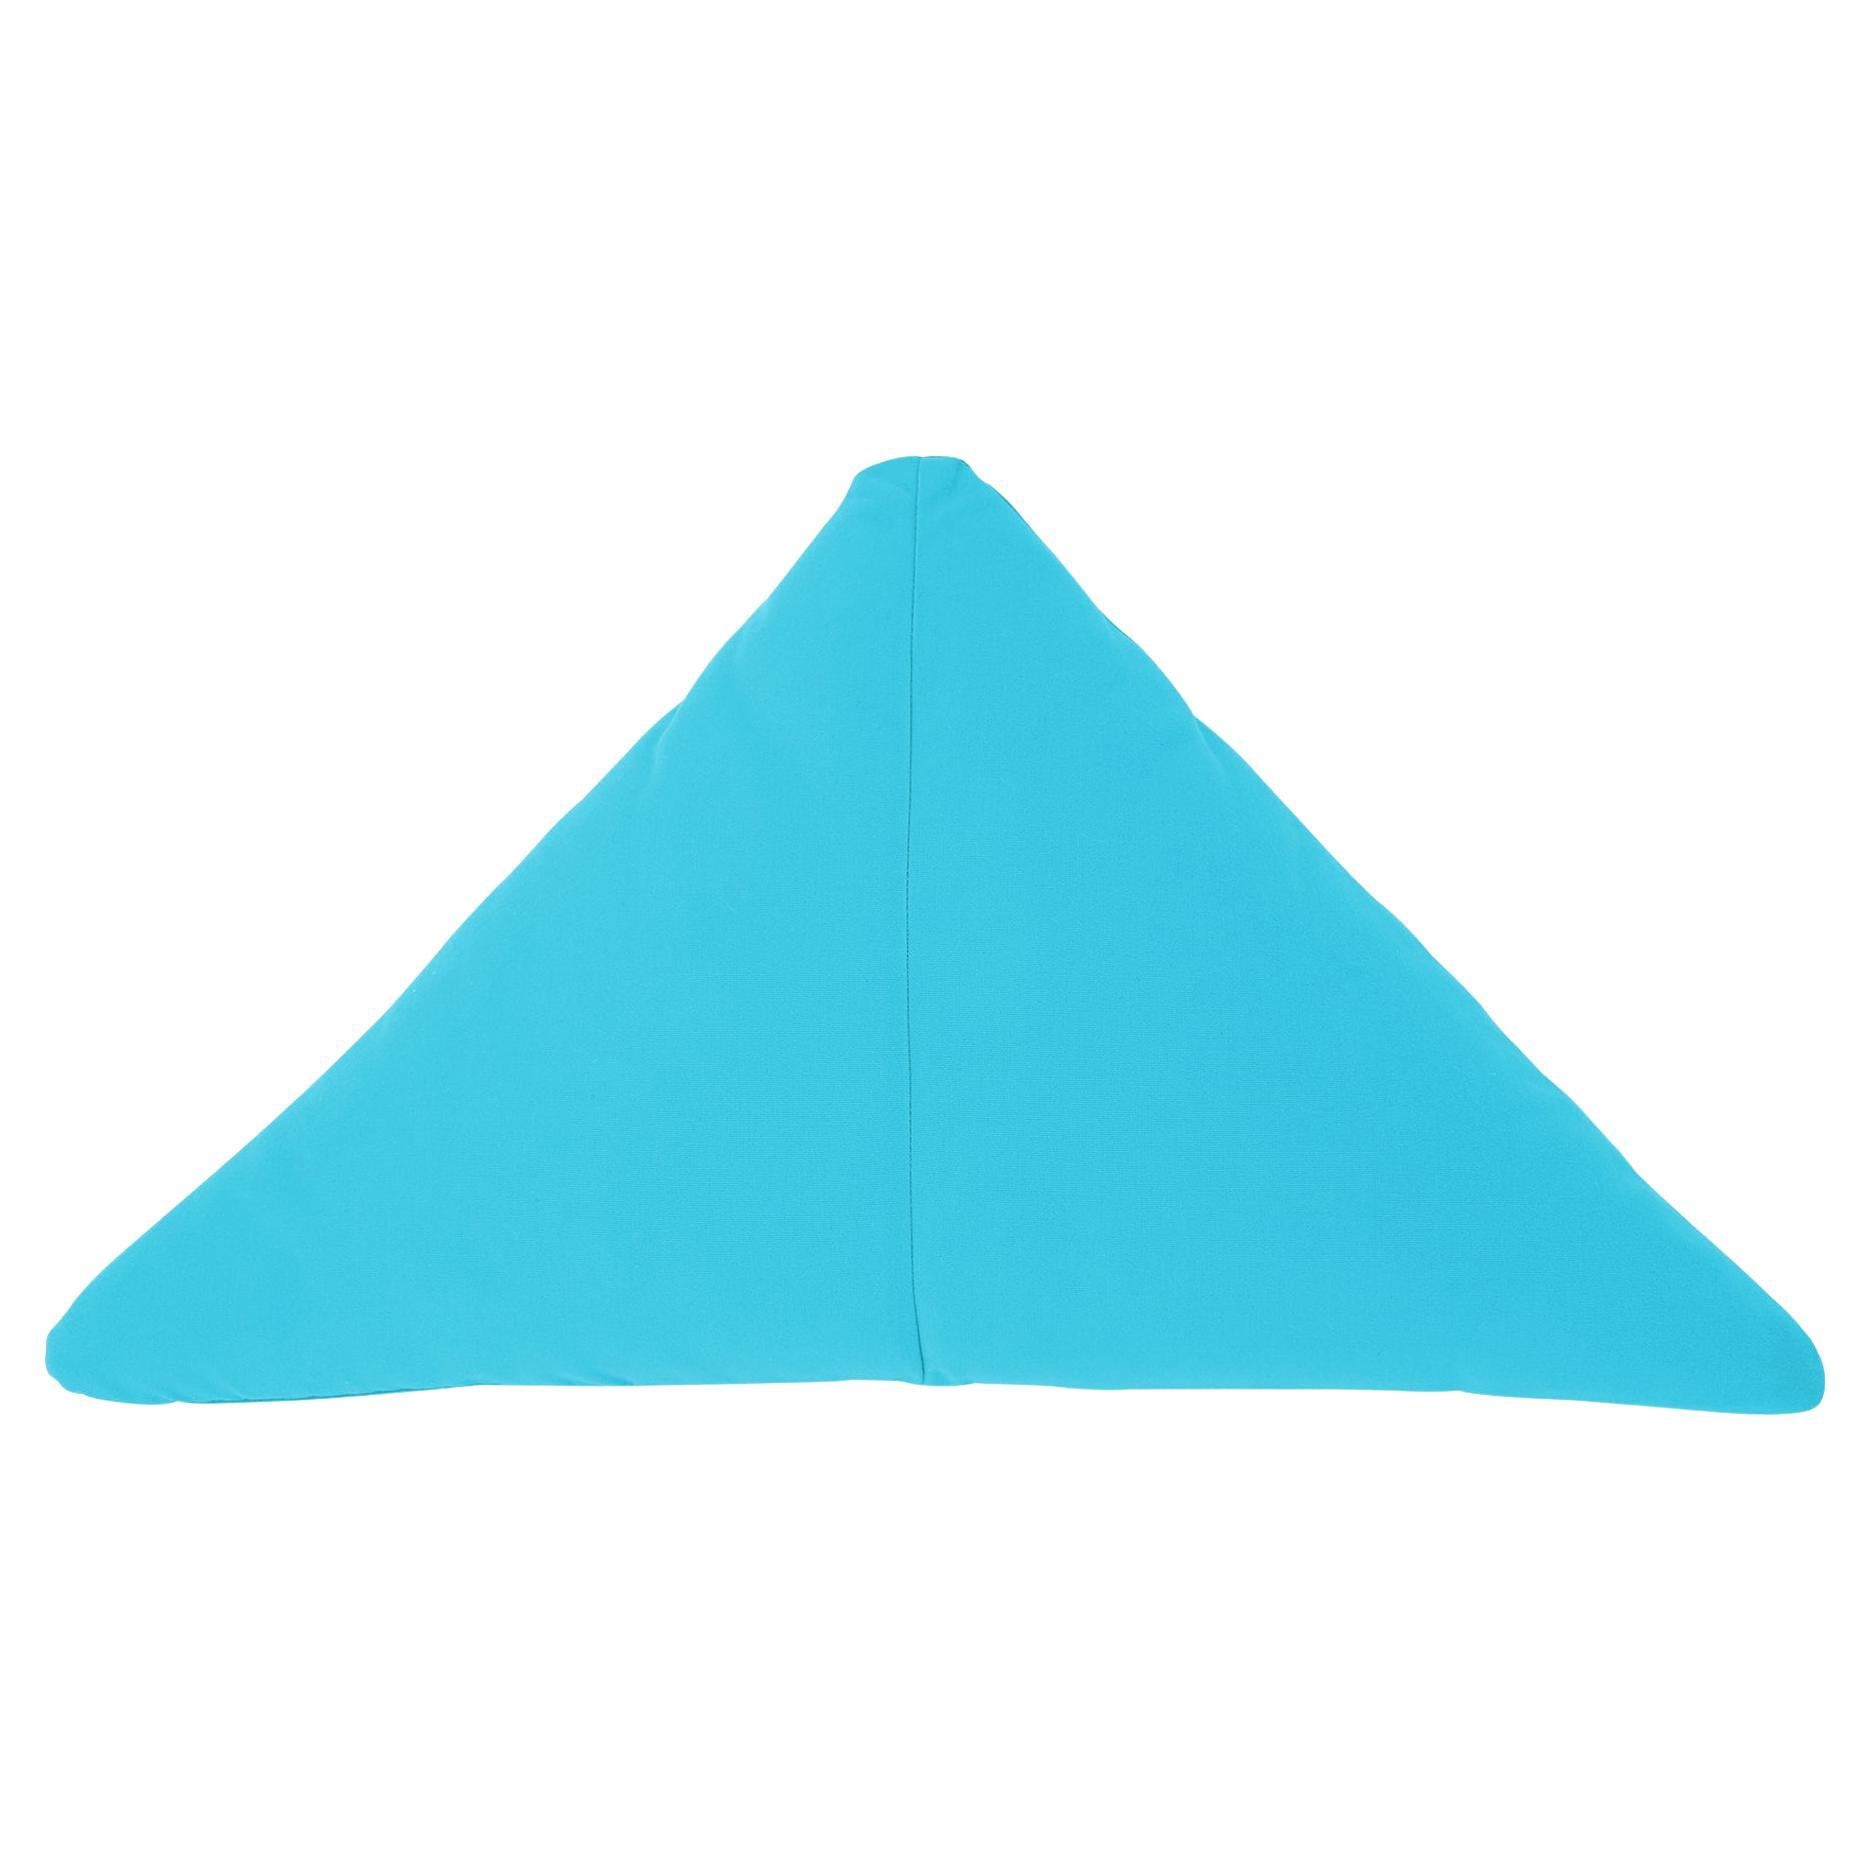 Woven Bend Goods - Triangle Throw Pillow in Teal Sunbrella For Sale